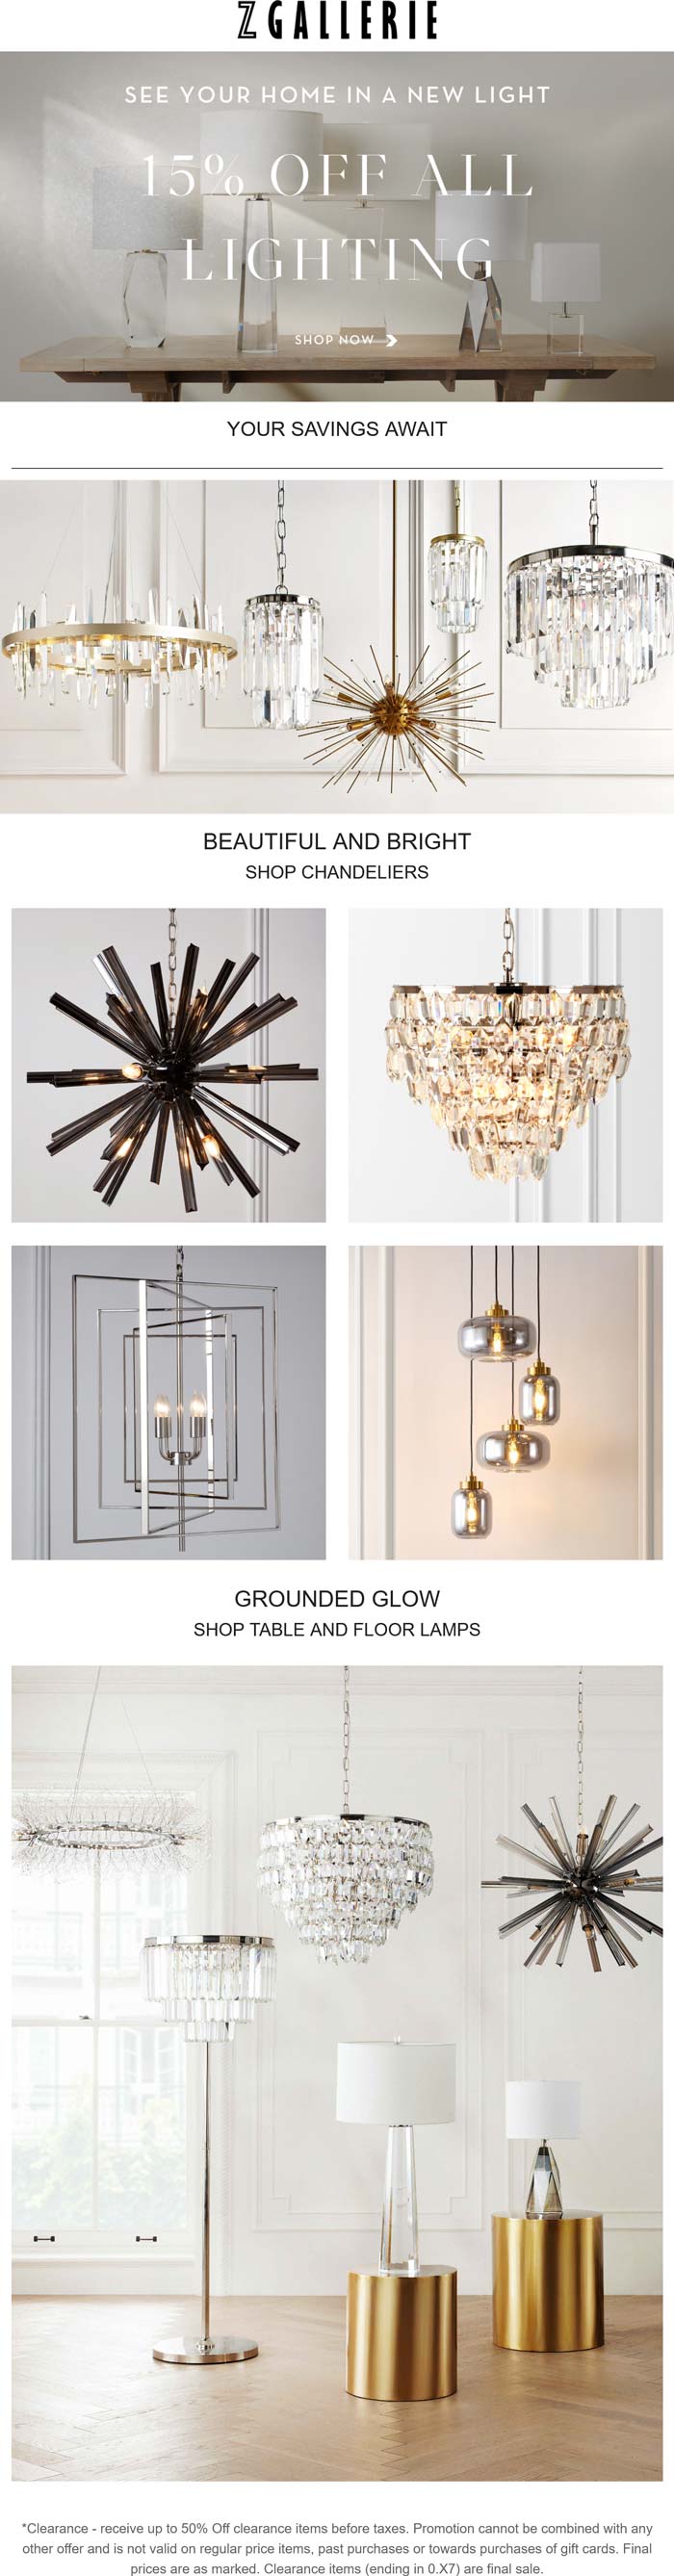 Z Gallerie stores Coupon  15% off all lighting at Z Gallerie furniture #zgallerie 